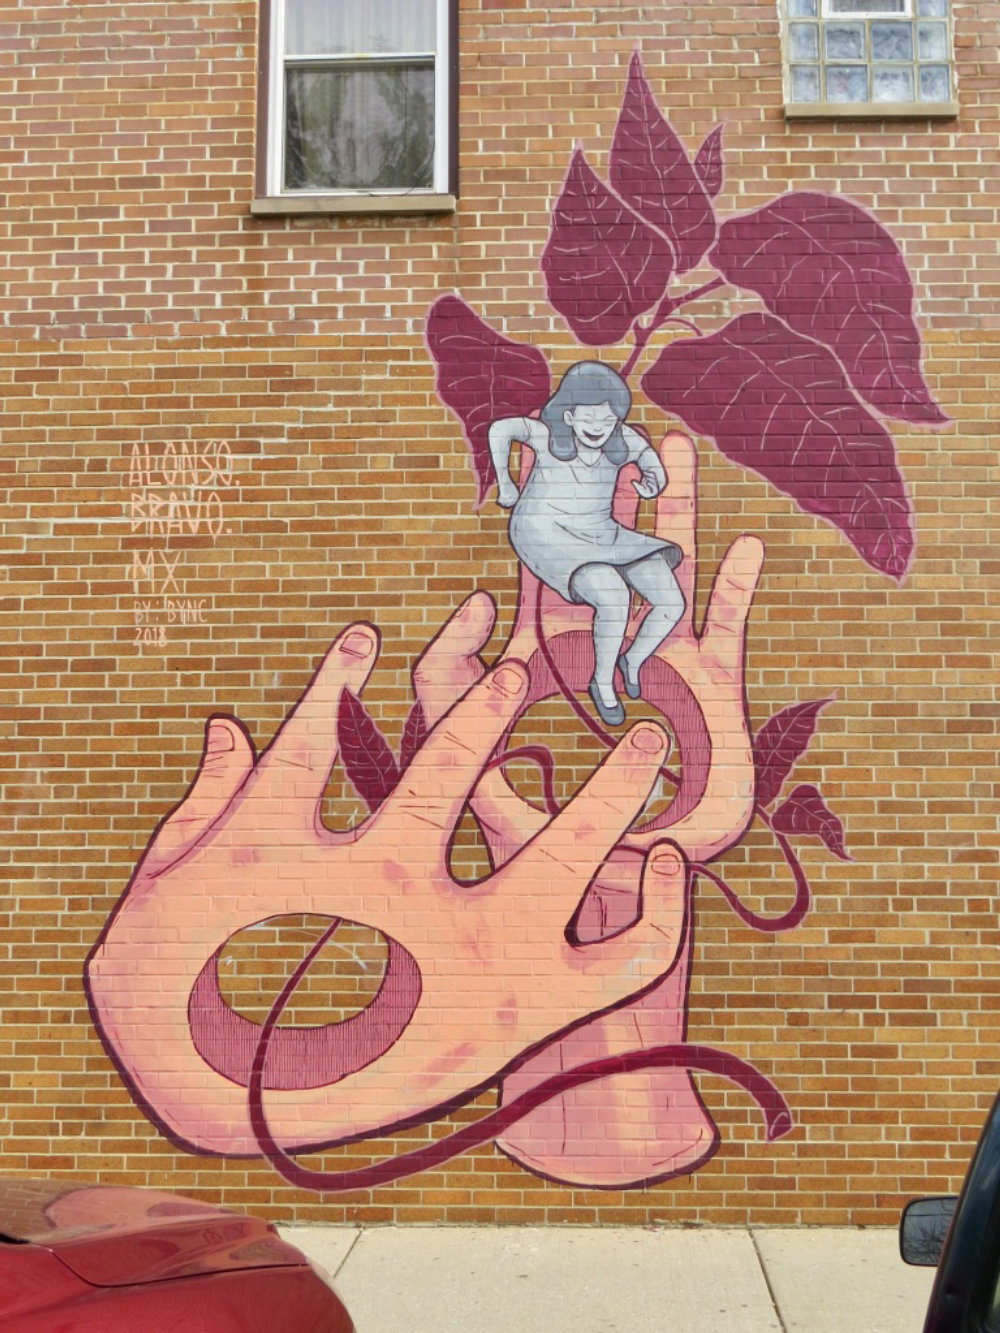 mural in Chicago by artist Alonso Bravo.